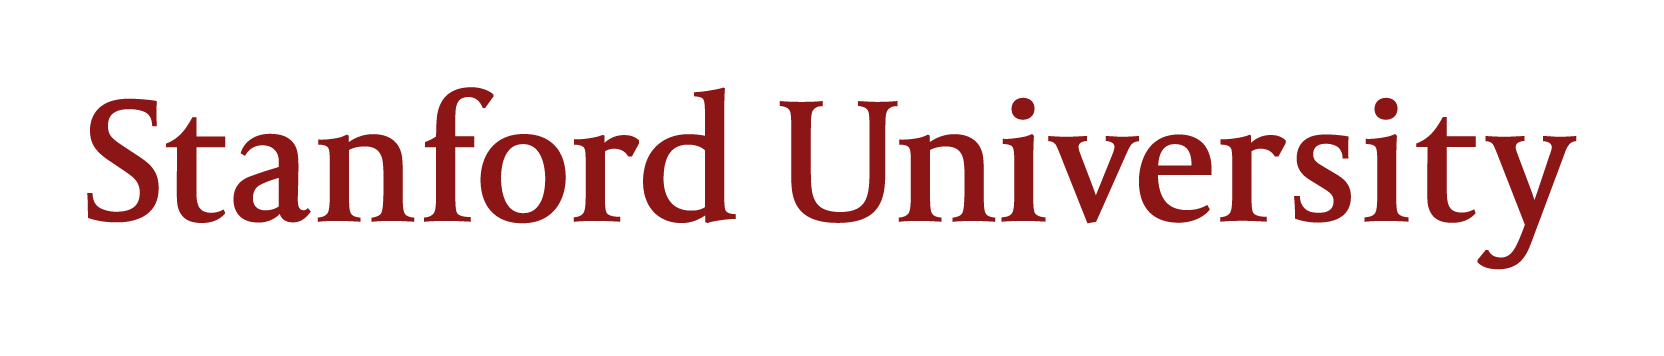 Standford University Logo - Name and Emblems | Stanford Identity